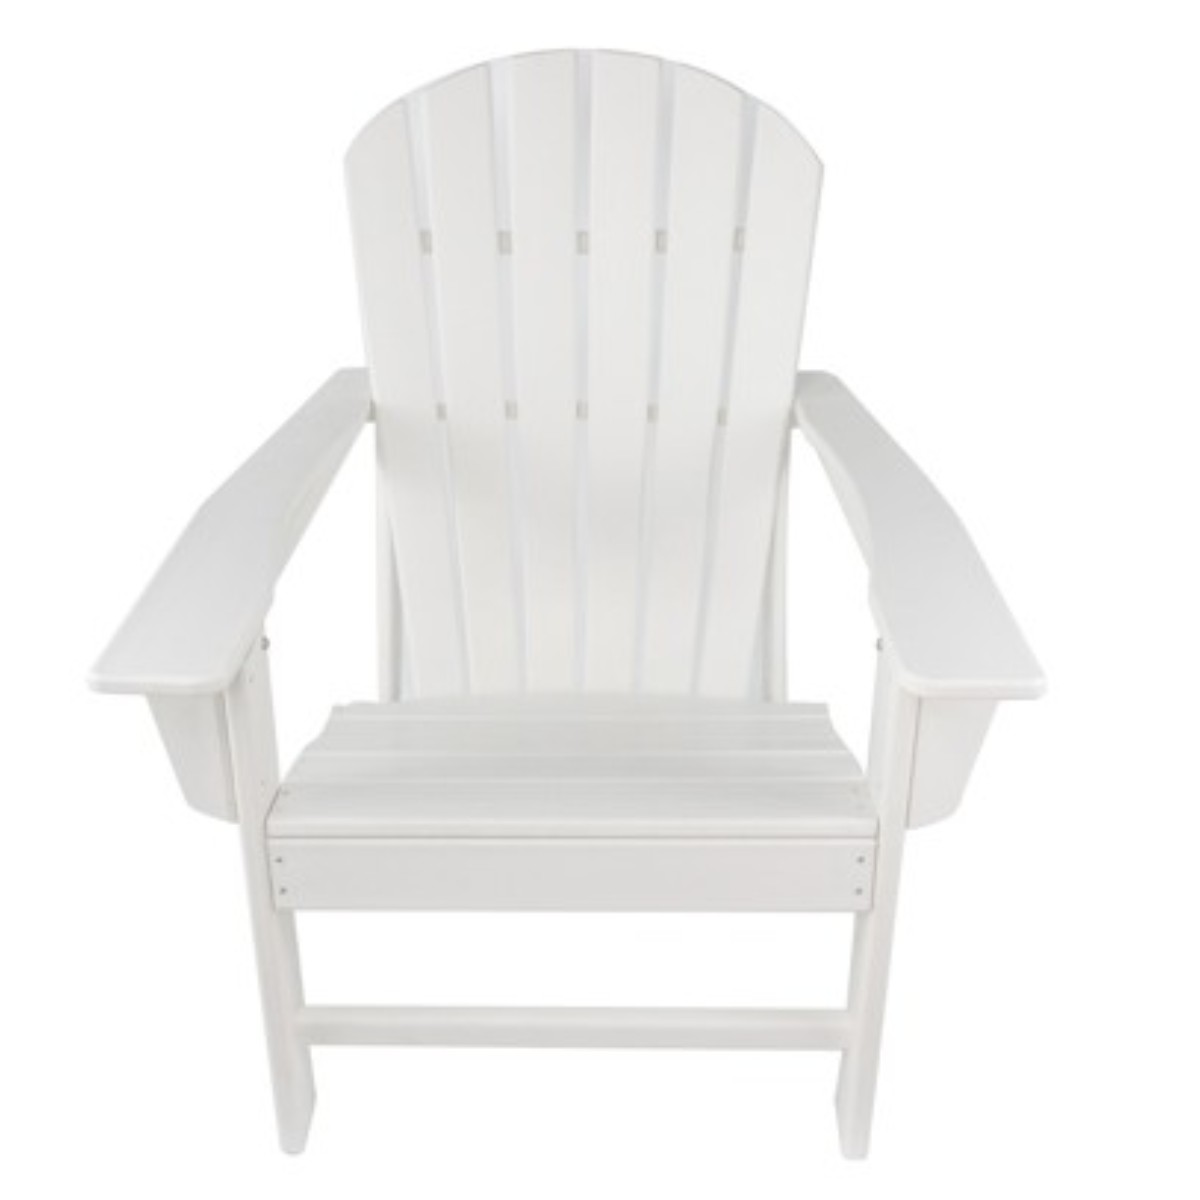 Folding Adirondack Chair Patio Chair Lawn Chair Outdoor 350 lbs Capacity Load Adirondack Chairs Weather Resistant for Patio Deck Garden 33.07*31.1*36.4" HDPE Resin Wood,White - image 5 of 9